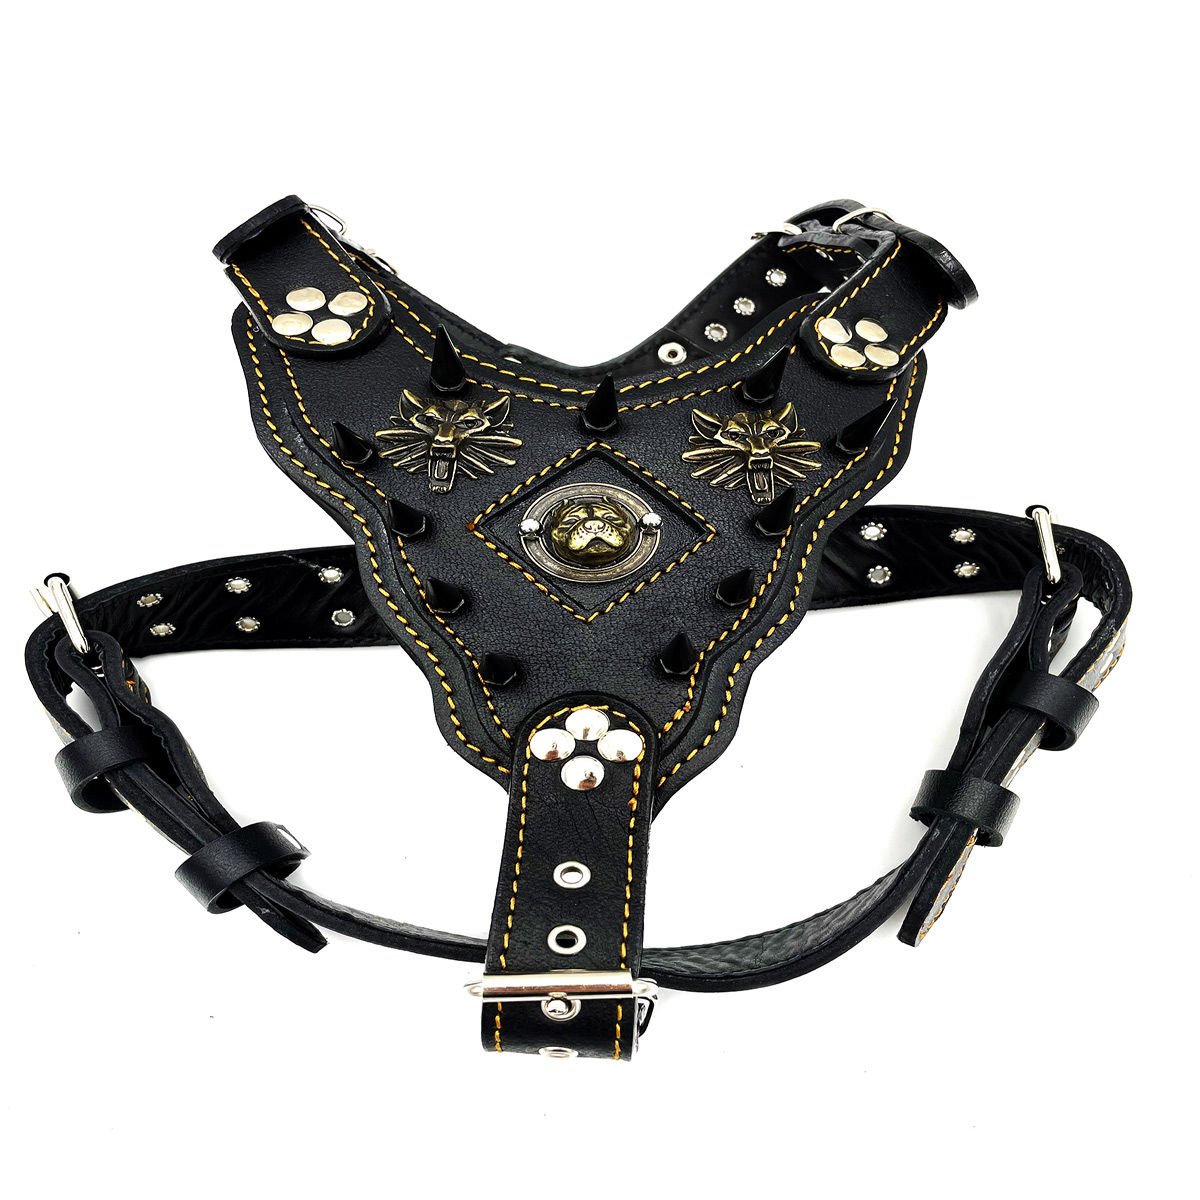 Black Spiked Pitbull Head Leather Dog Harness